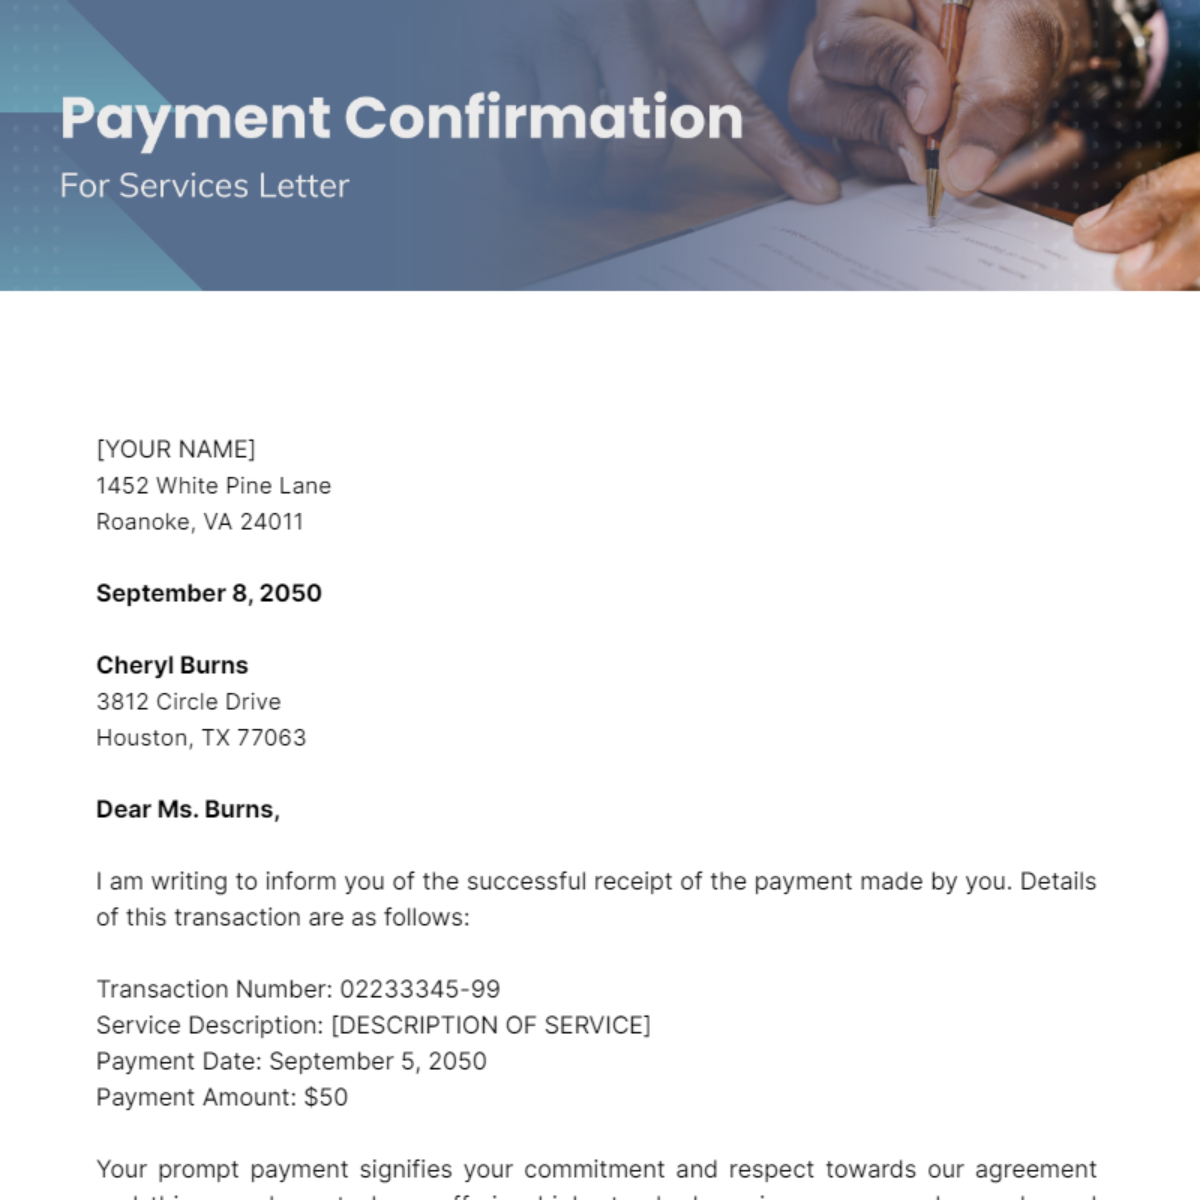 Payment Confirmation for Services Letter Template